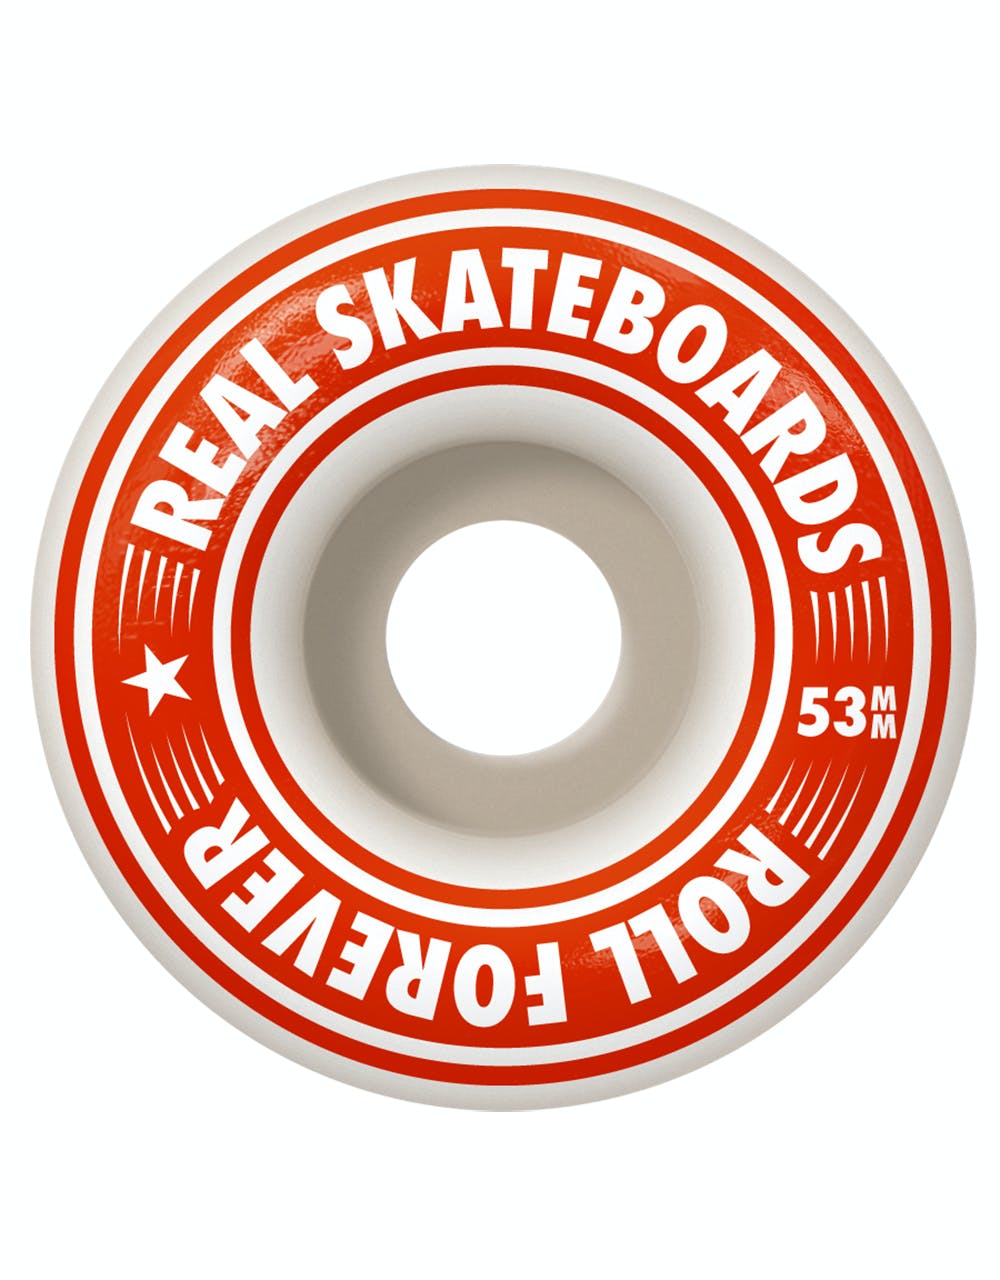 Real Deeds Fades Complete Skateboard - 7.75"